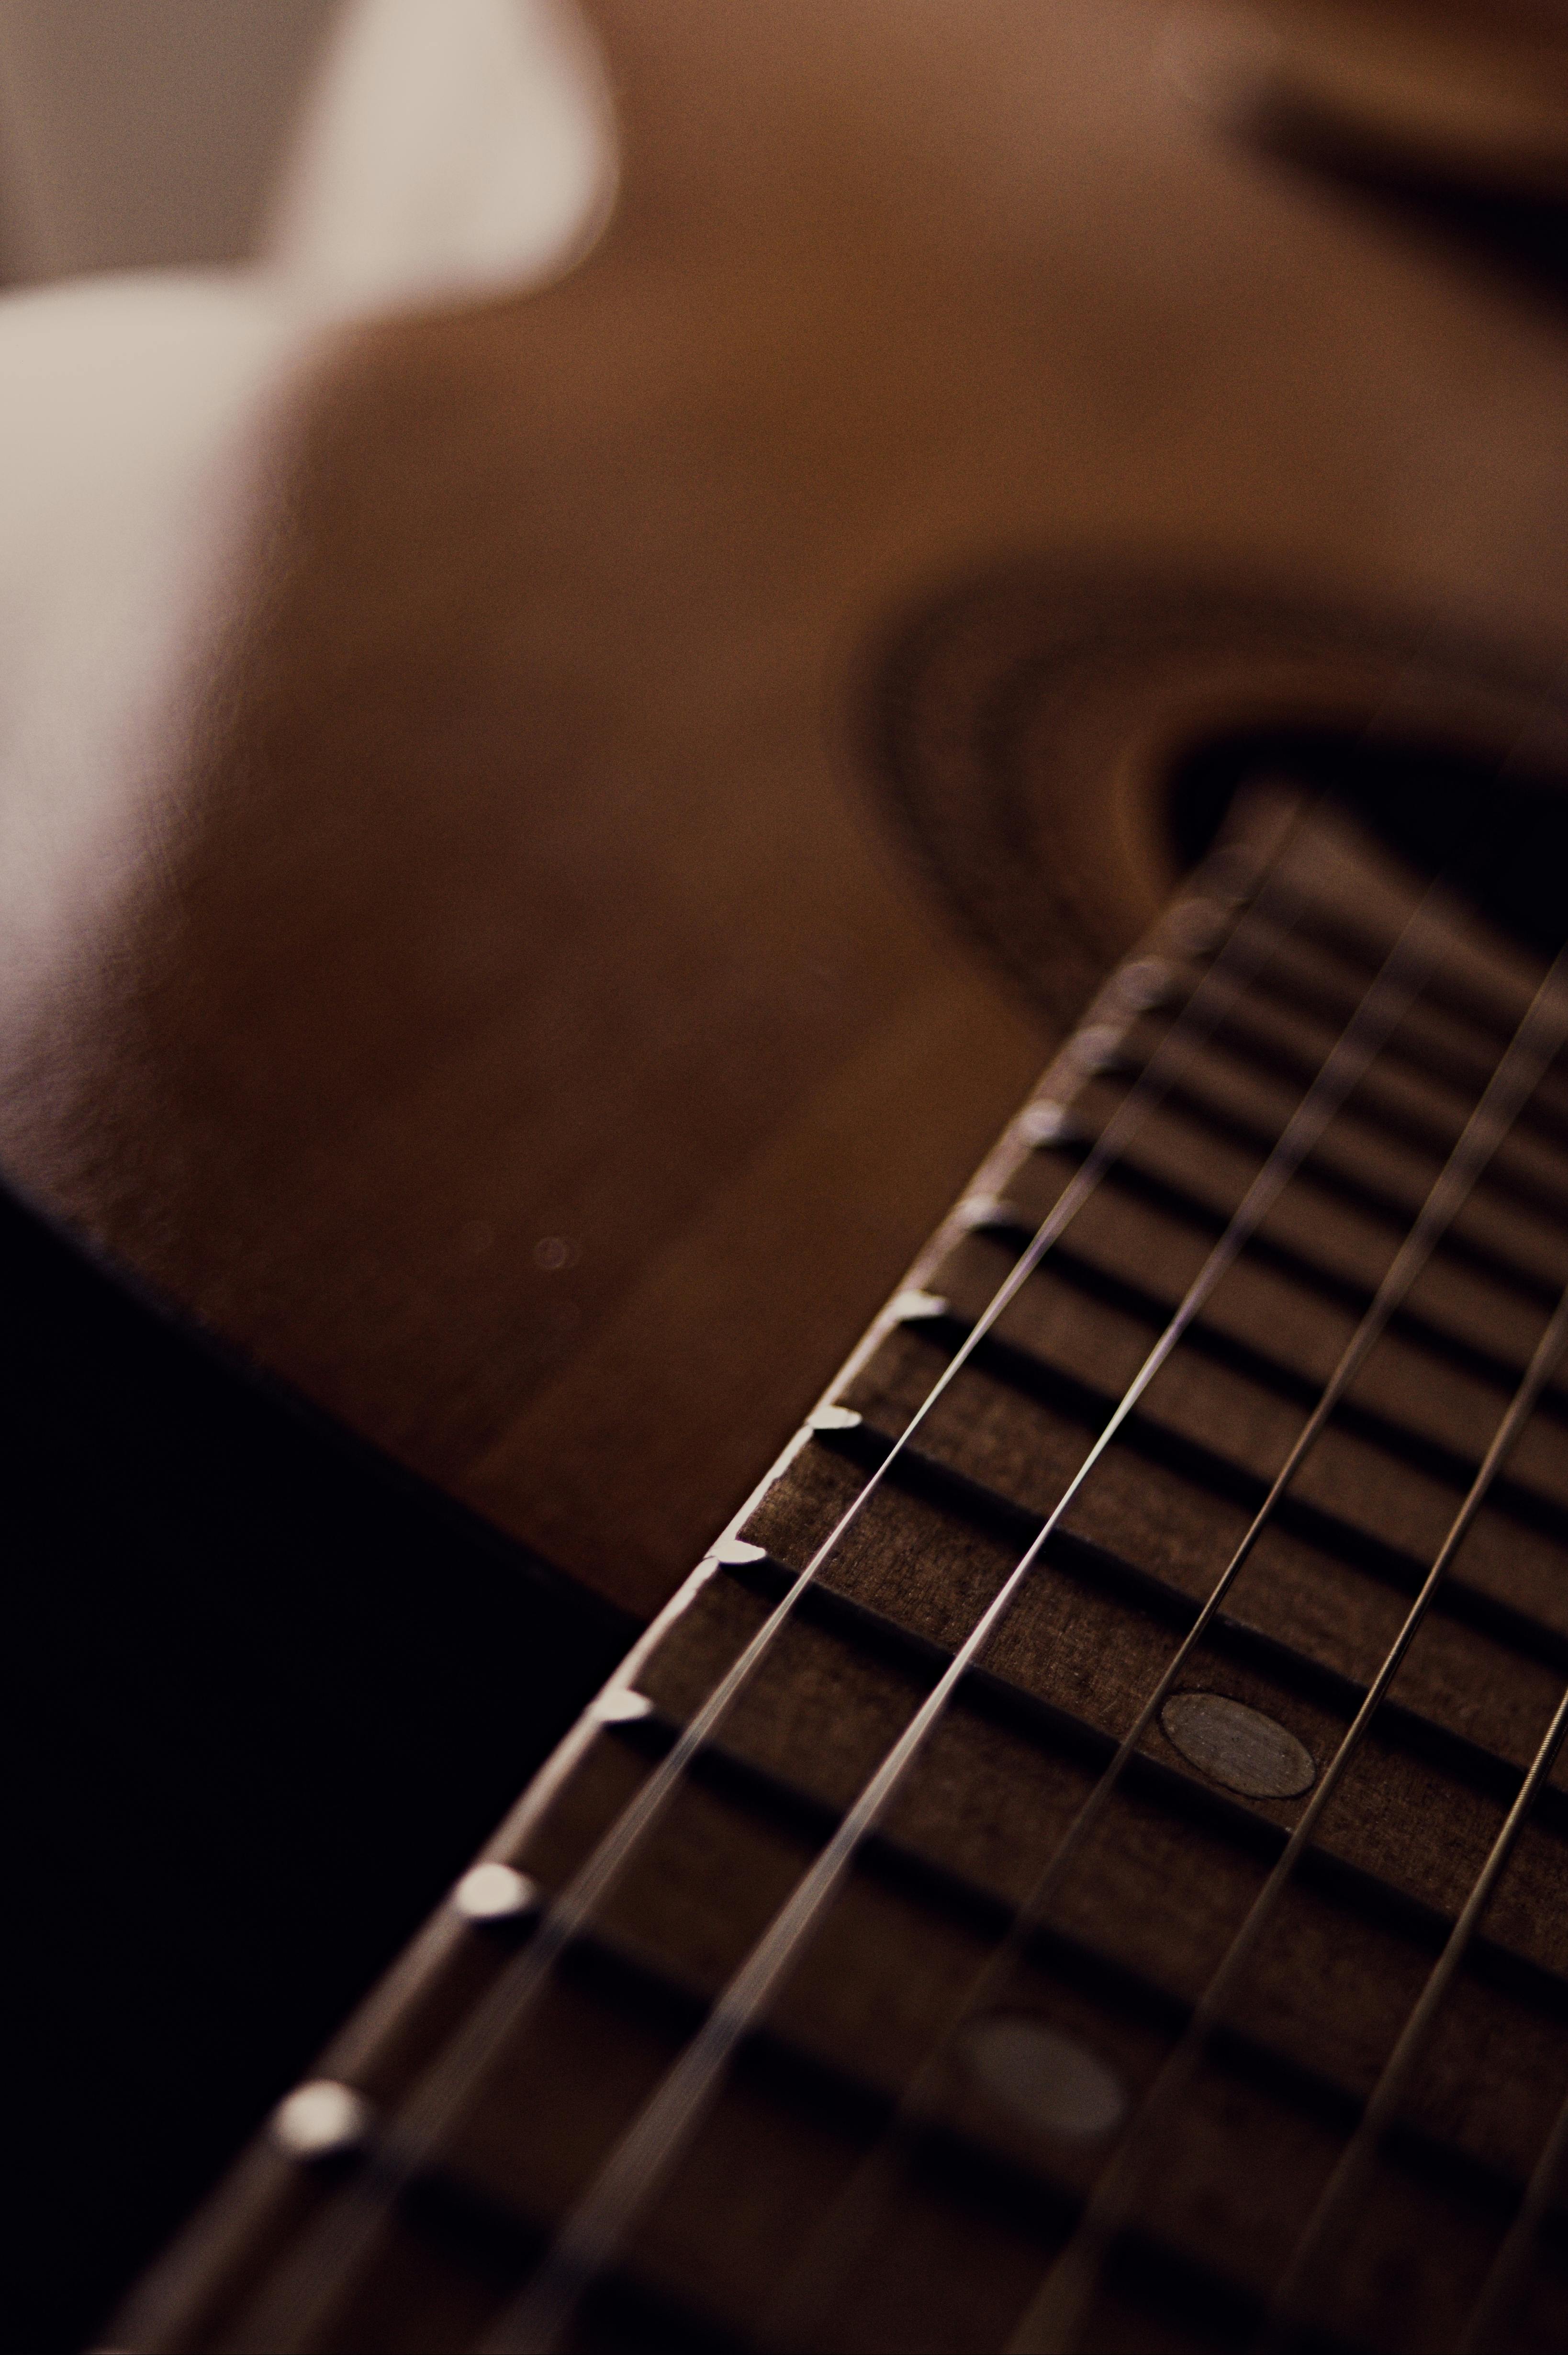 Brown acoustic guitar on black chair photo  Free Guitar Image on Unsplash